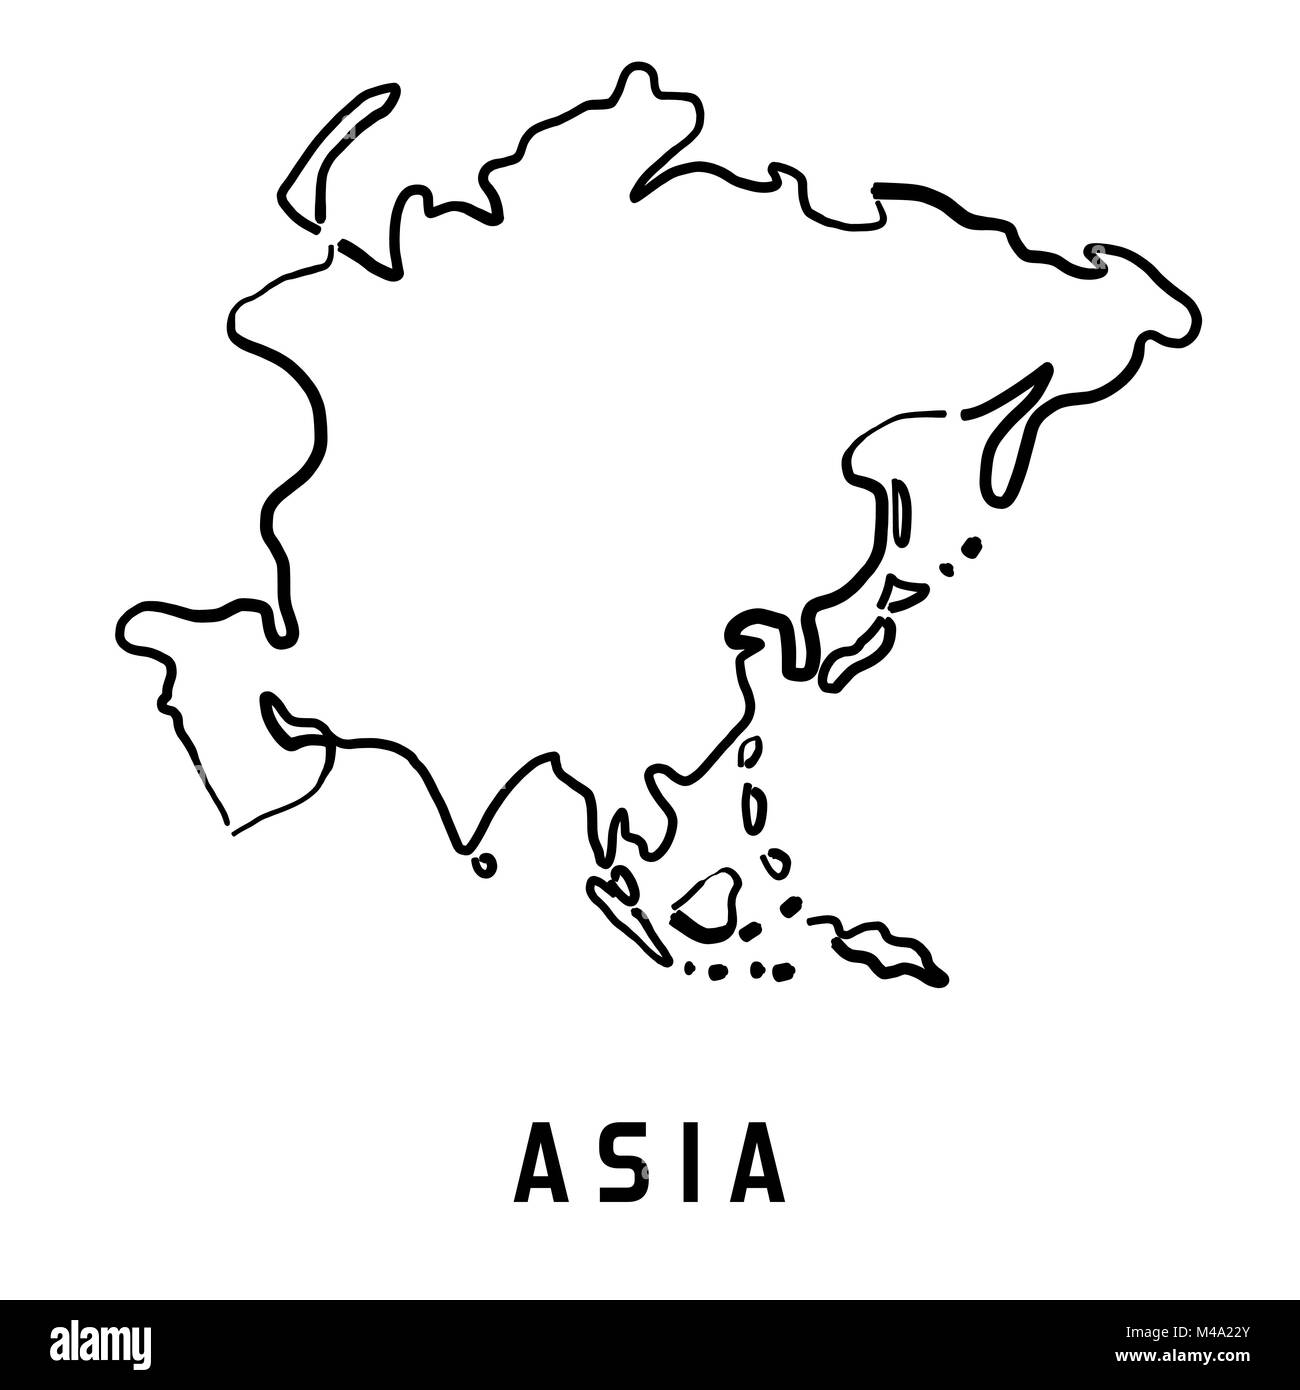 Blank Political Outline Map Of Asia Continent Vector Illustration Images